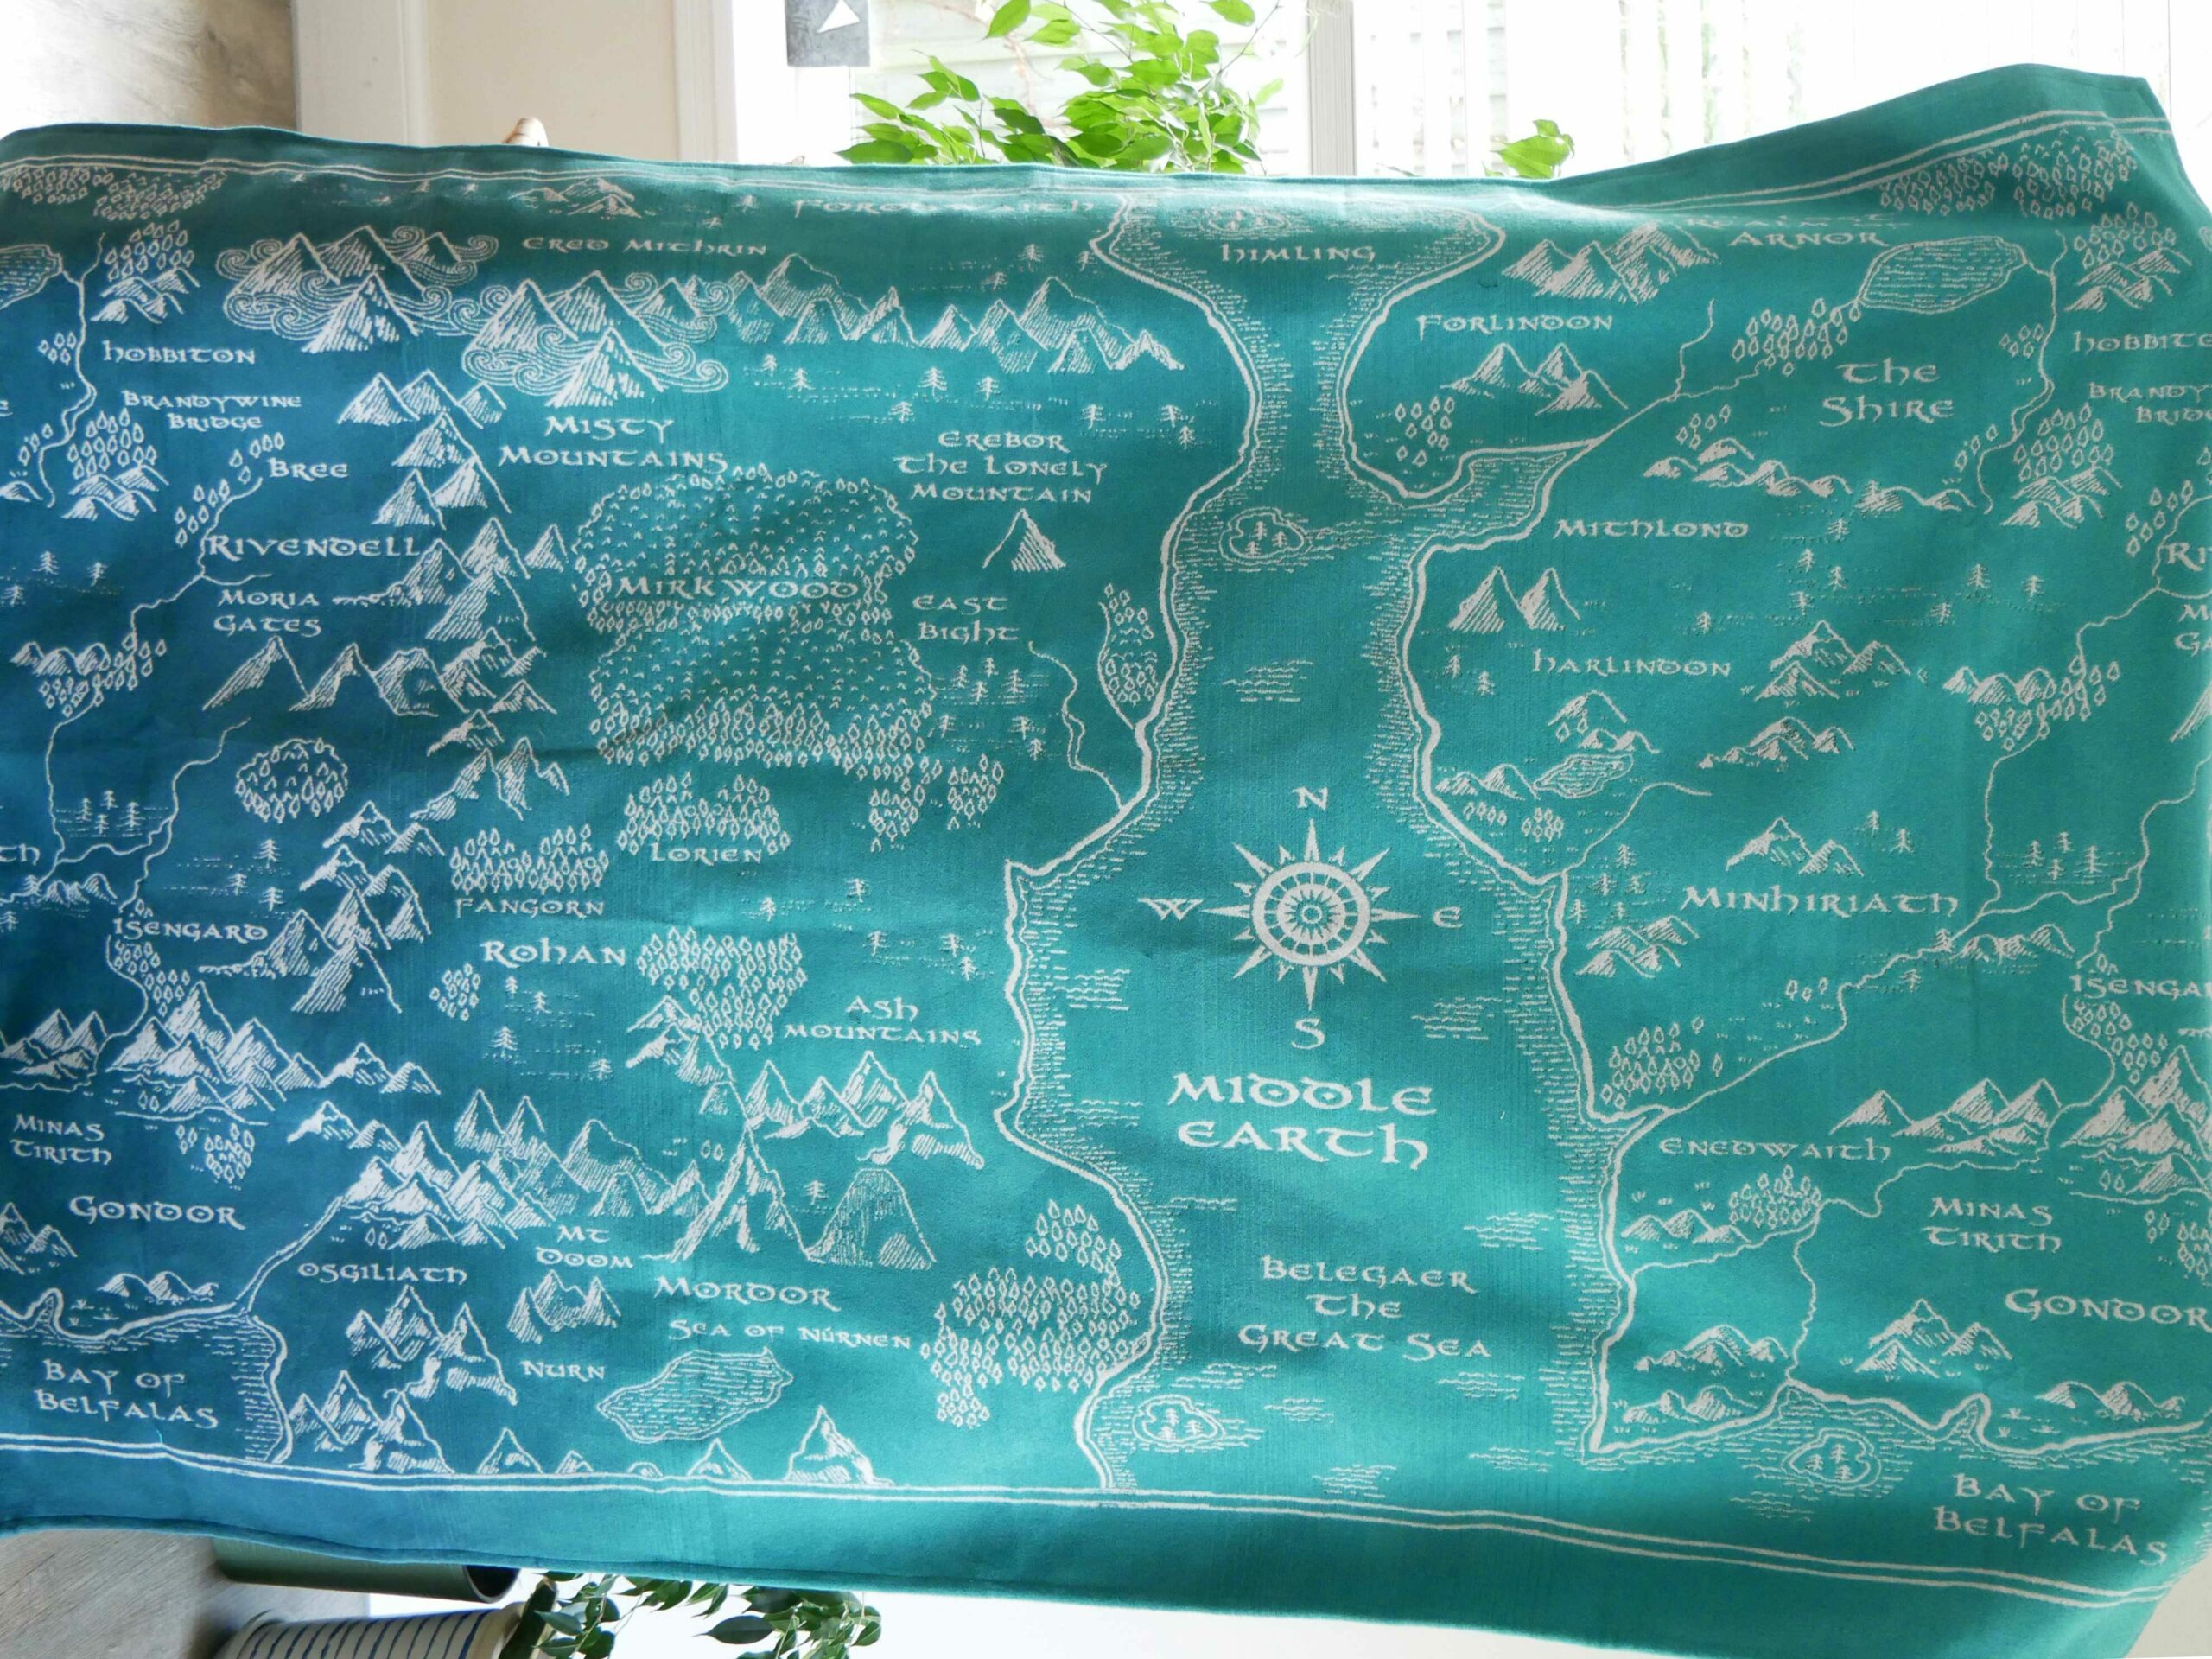 The Realm Of Middle Earth Fleece Blanket